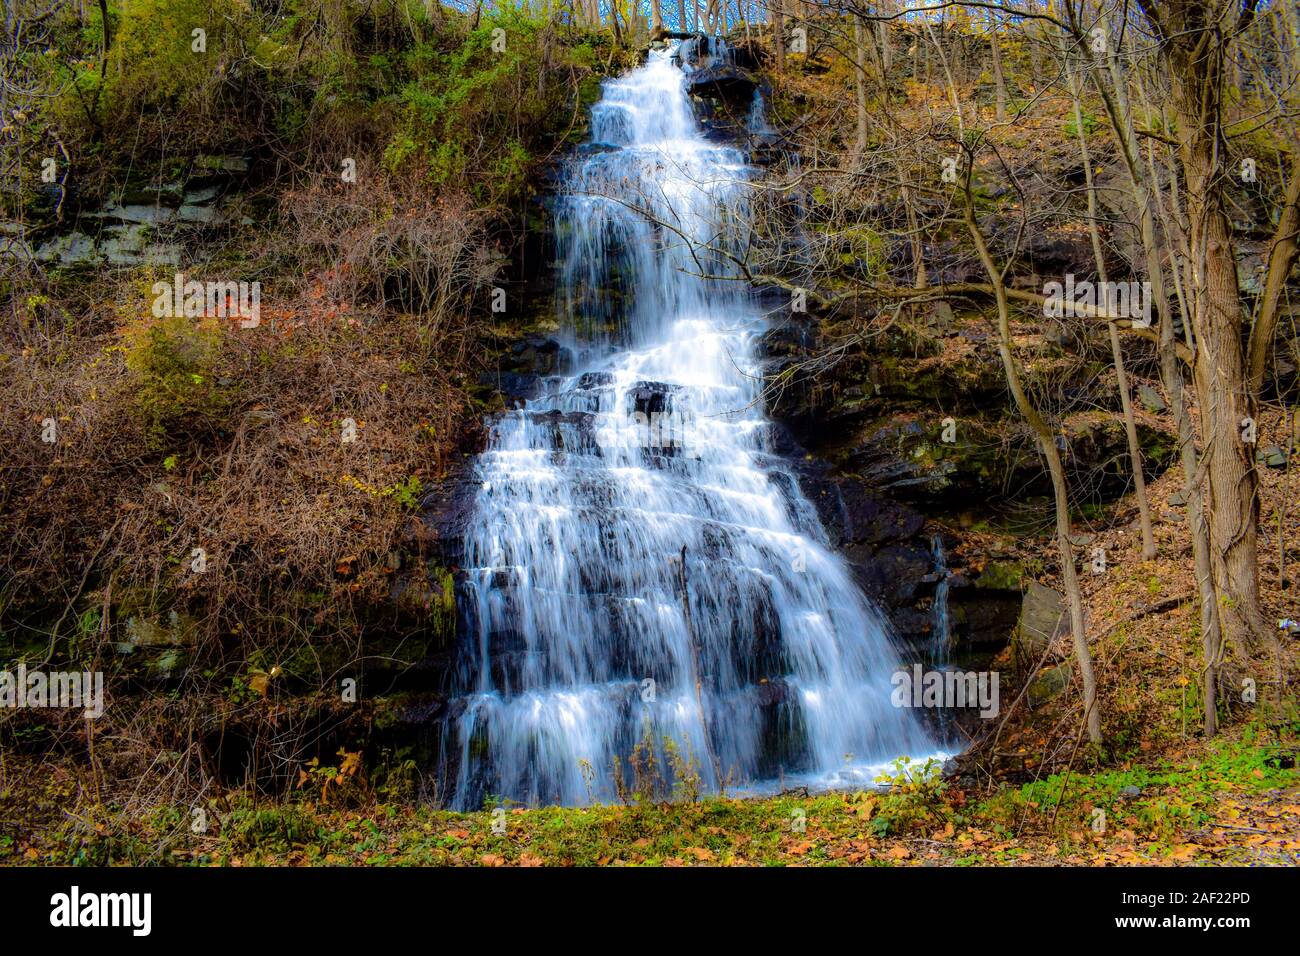 Colorful Waterfall flowing down The Mountain Side Stock Photo